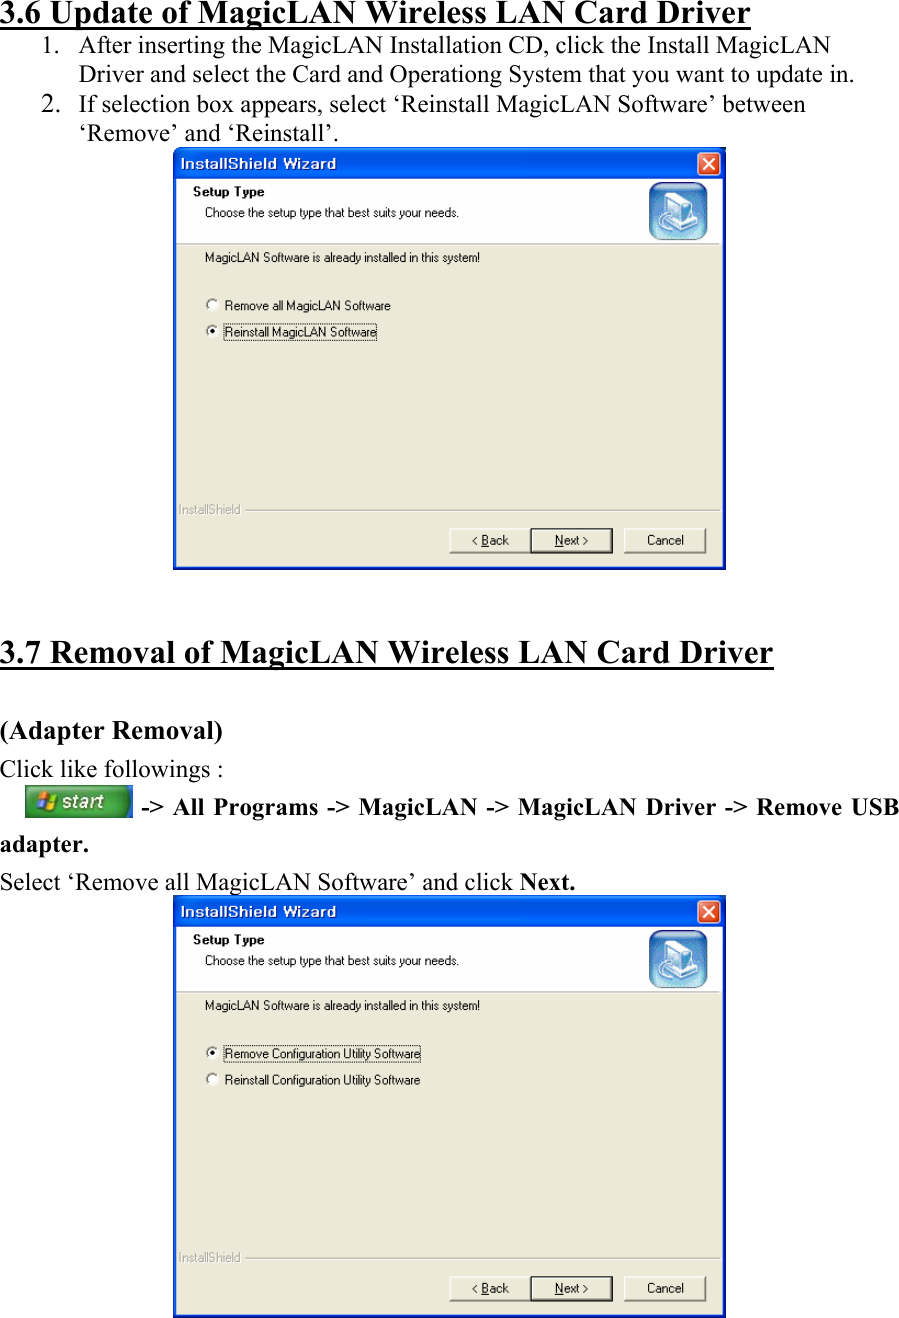 3.6 Update of MagicLAN Wireless LAN Card Driver 1. After inserting the MagicLAN Installation CD, click the Install MagicLAN Driver and select the Card and Operationg System that you want to update in. 2. If selection box appears, select ‘Reinstall MagicLAN Software’ between ‘Remove’ and ‘Reinstall’.     3.7 Removal of MagicLAN Wireless LAN Card Driver  (Adapter Removal) Click like followings :   -&gt; All Programs -&gt; MagicLAN -&gt; MagicLAN Driver -&gt; Remove USB adapter. Select ‘Remove all MagicLAN Software’ and click Next.  